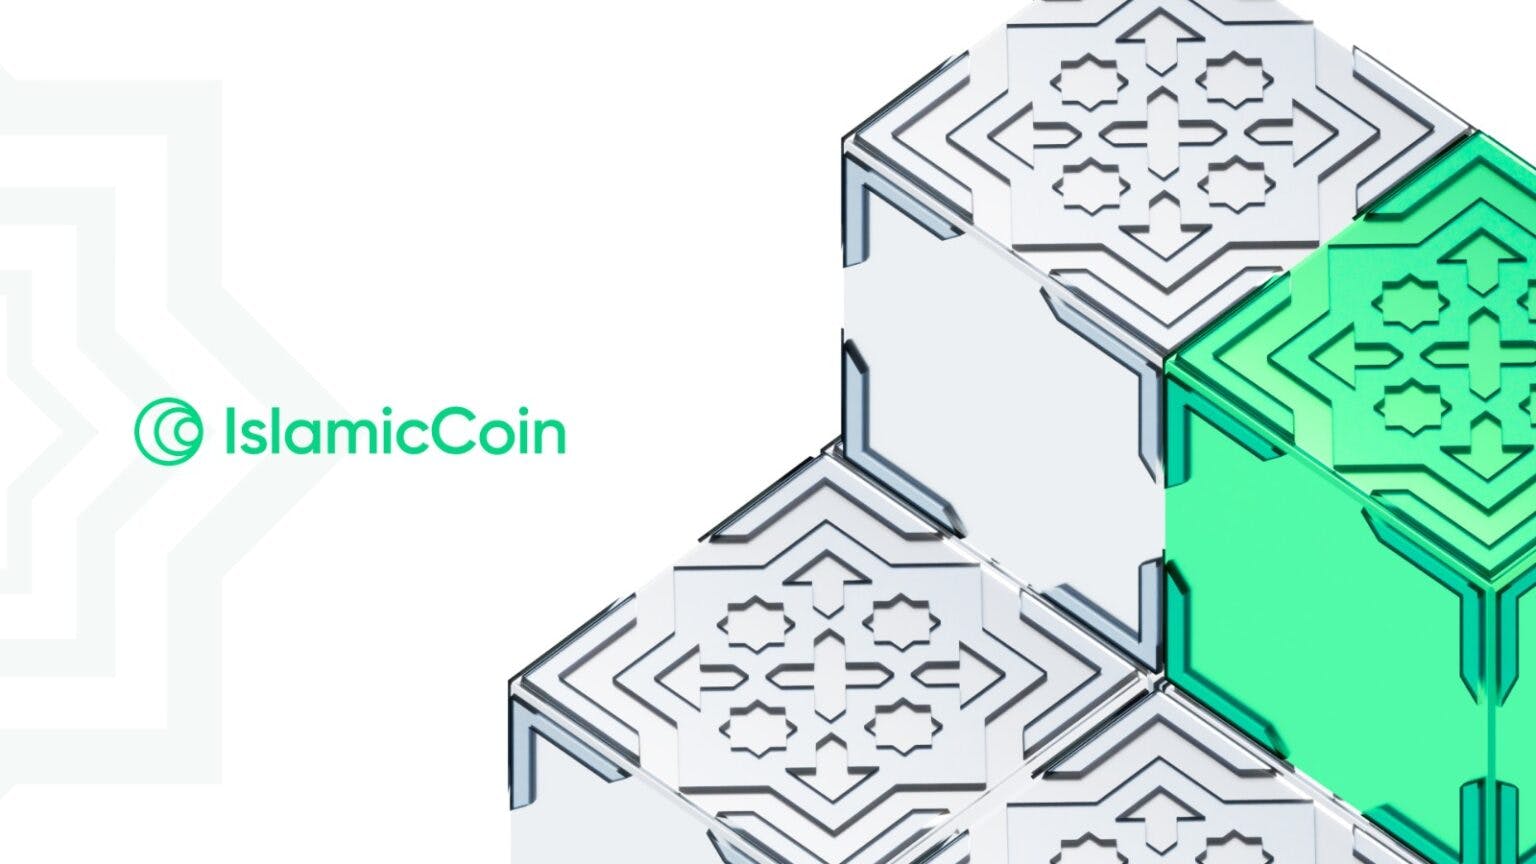 What is Islamic Coin and What is it Used for?